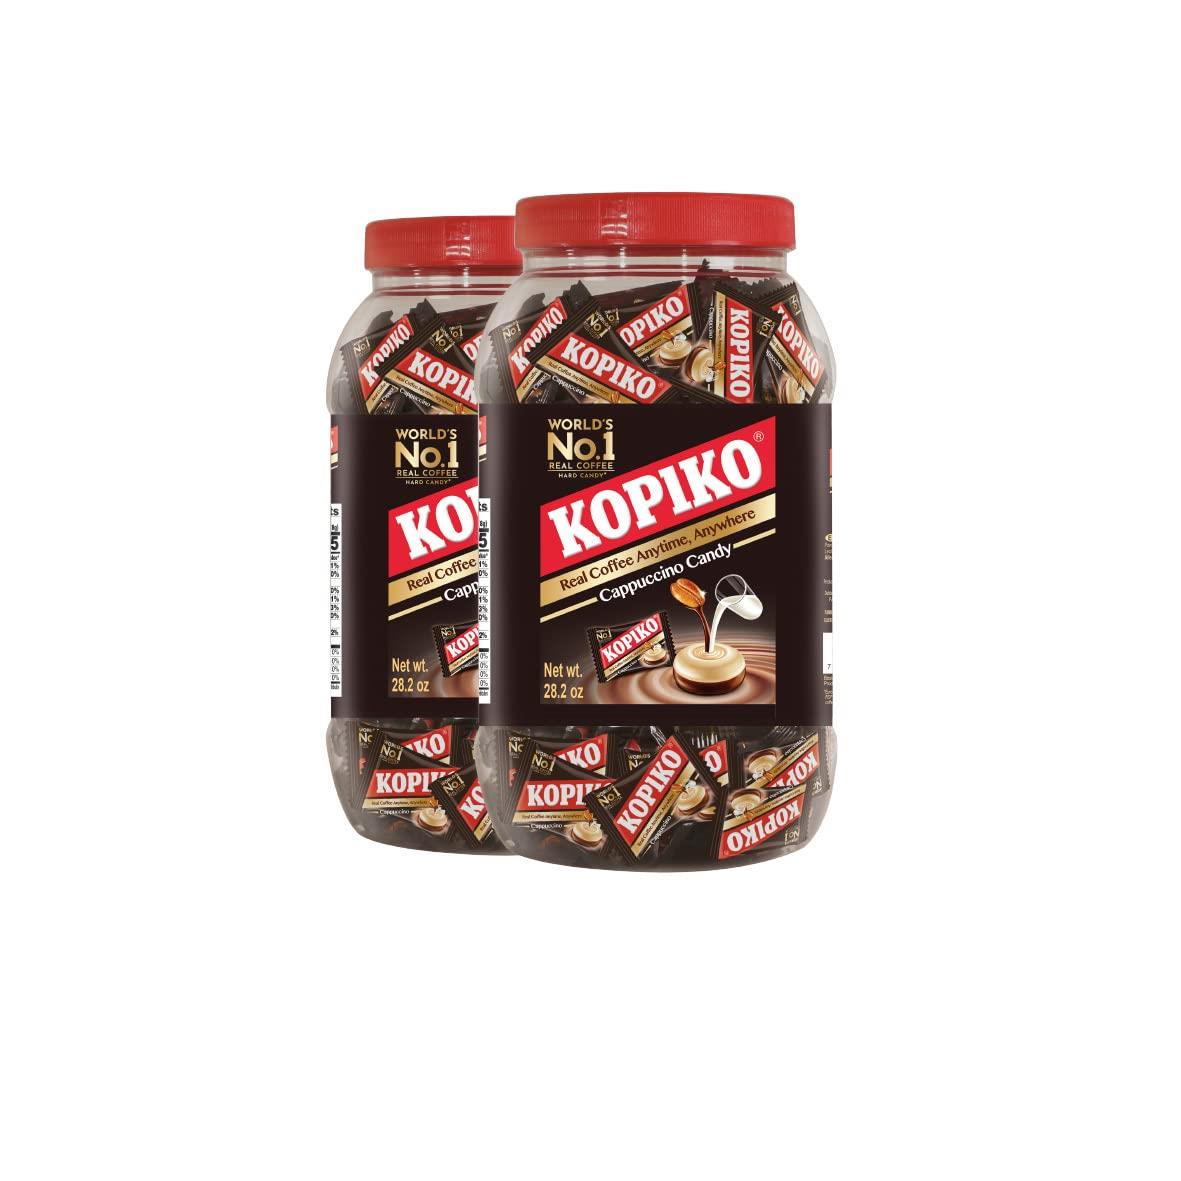 Kopiko, Candy in Jar, Cappuccino Candy, 800g/28.2oz (Pack of 2) World's No.1 Real Coffee Hard Candy